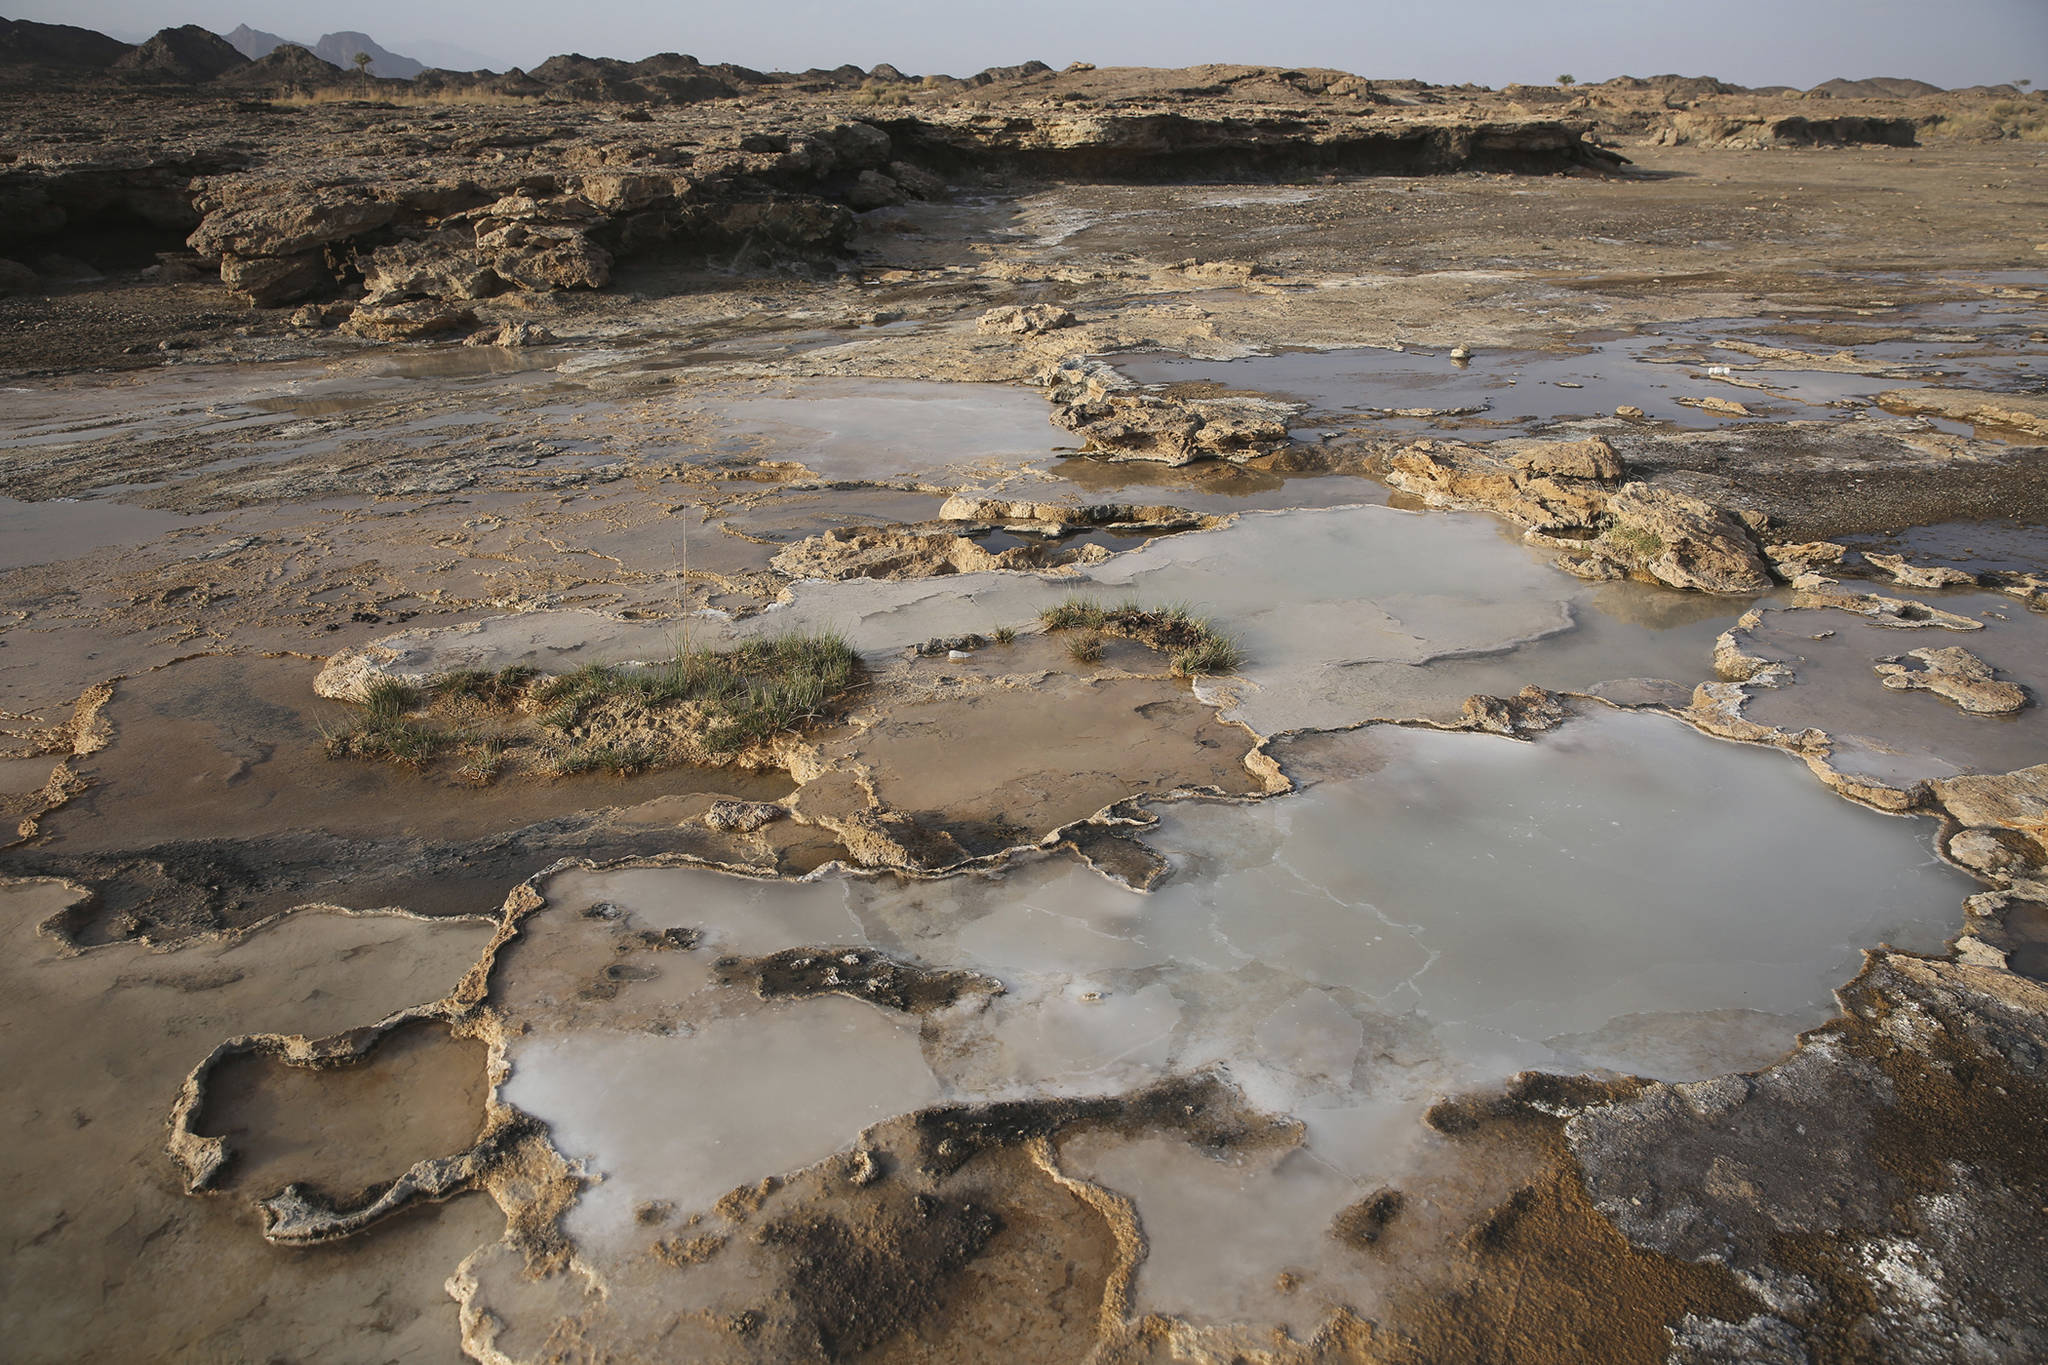 This March 5 photo shows travertine pools with white films of carbon fused with calcium, a chemical process being explored by a geological research project, in the al-Hajjar mountains of Oman. Deep in the jagged red mountains, geologists from the Oman Drilling Project are drilling in search of the holy grail of reversing climate change: an efficient and cheap way to remove carbon dioxide from the air and oceans. They are coring samples from one of the world’s only exposed sections of the Earth’s mantle to uncover how a spontaneous natural process millions of years ago transformed CO2 into limestone and marble. (Sam McNeil | The Associated Press)